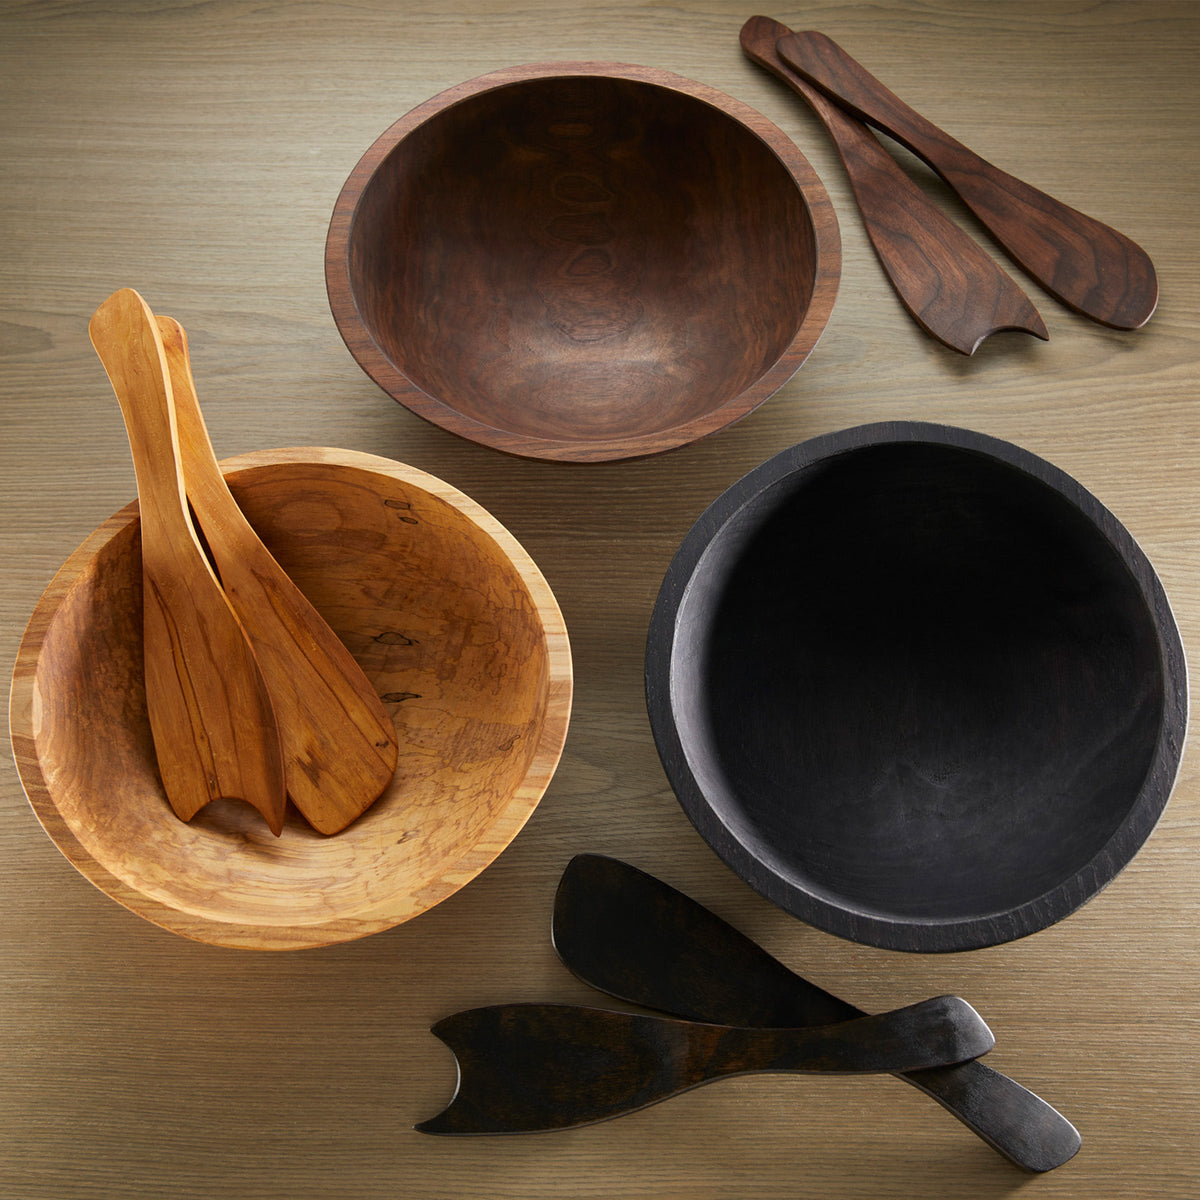 Four Peterman&#39;s Spalted Maple Handcrafted Salad Tossers and wooden bowls made from maple wood with spalted lines, displayed on a table.